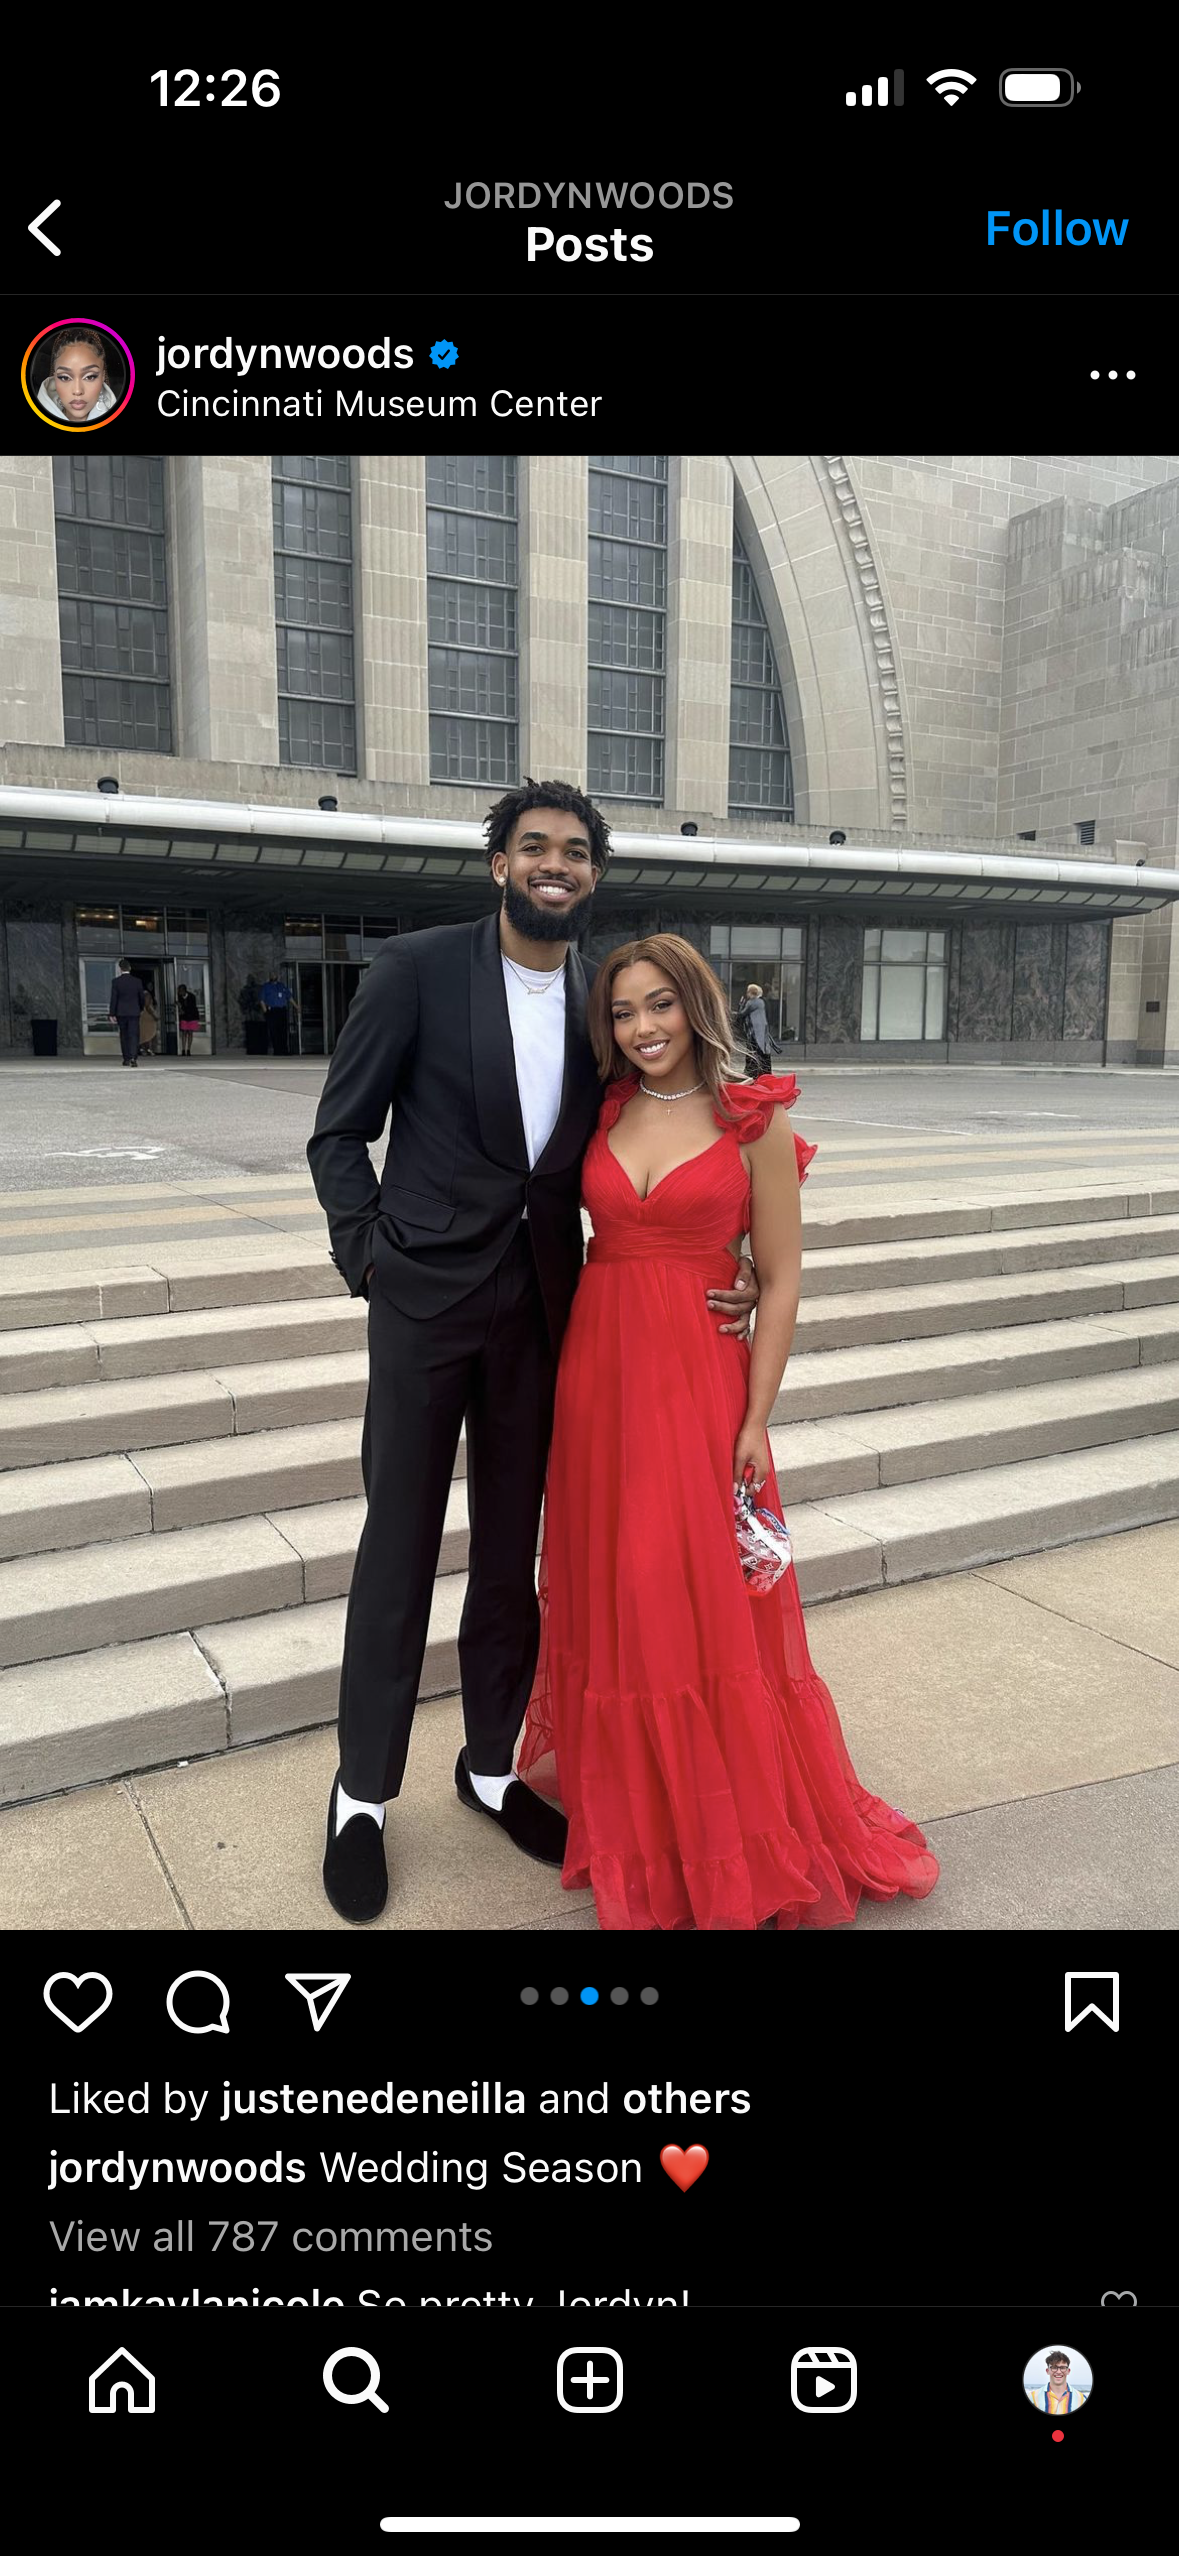 NBA star Karl-Anthony Towns and social media influencer Jordyn Woods attended a wedding in Cincinnati over the weekend.